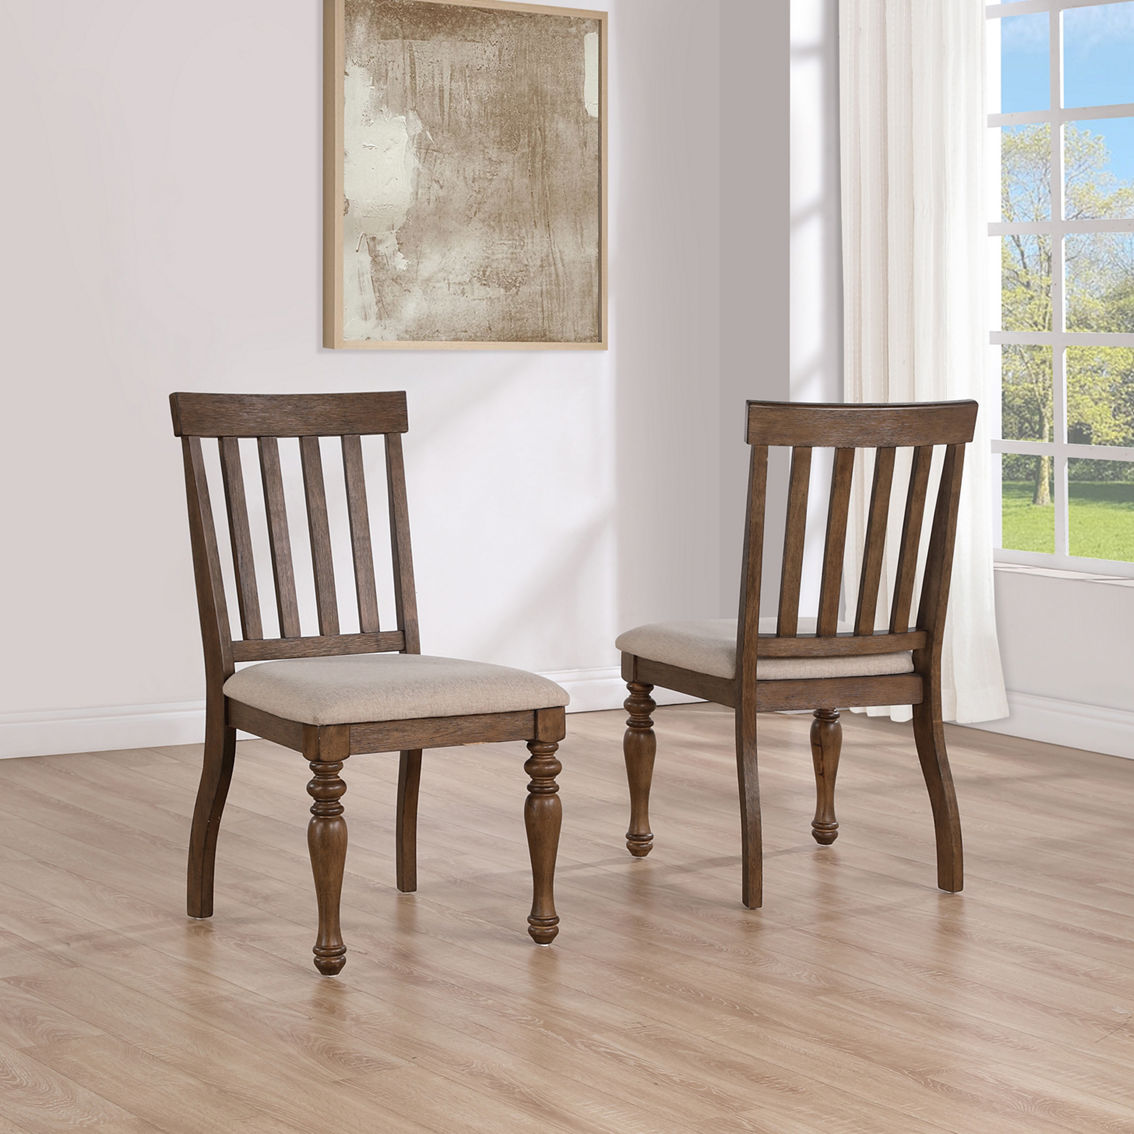 Steve Silver Joanna Brown Side chairs 2 pk. - Image 2 of 4